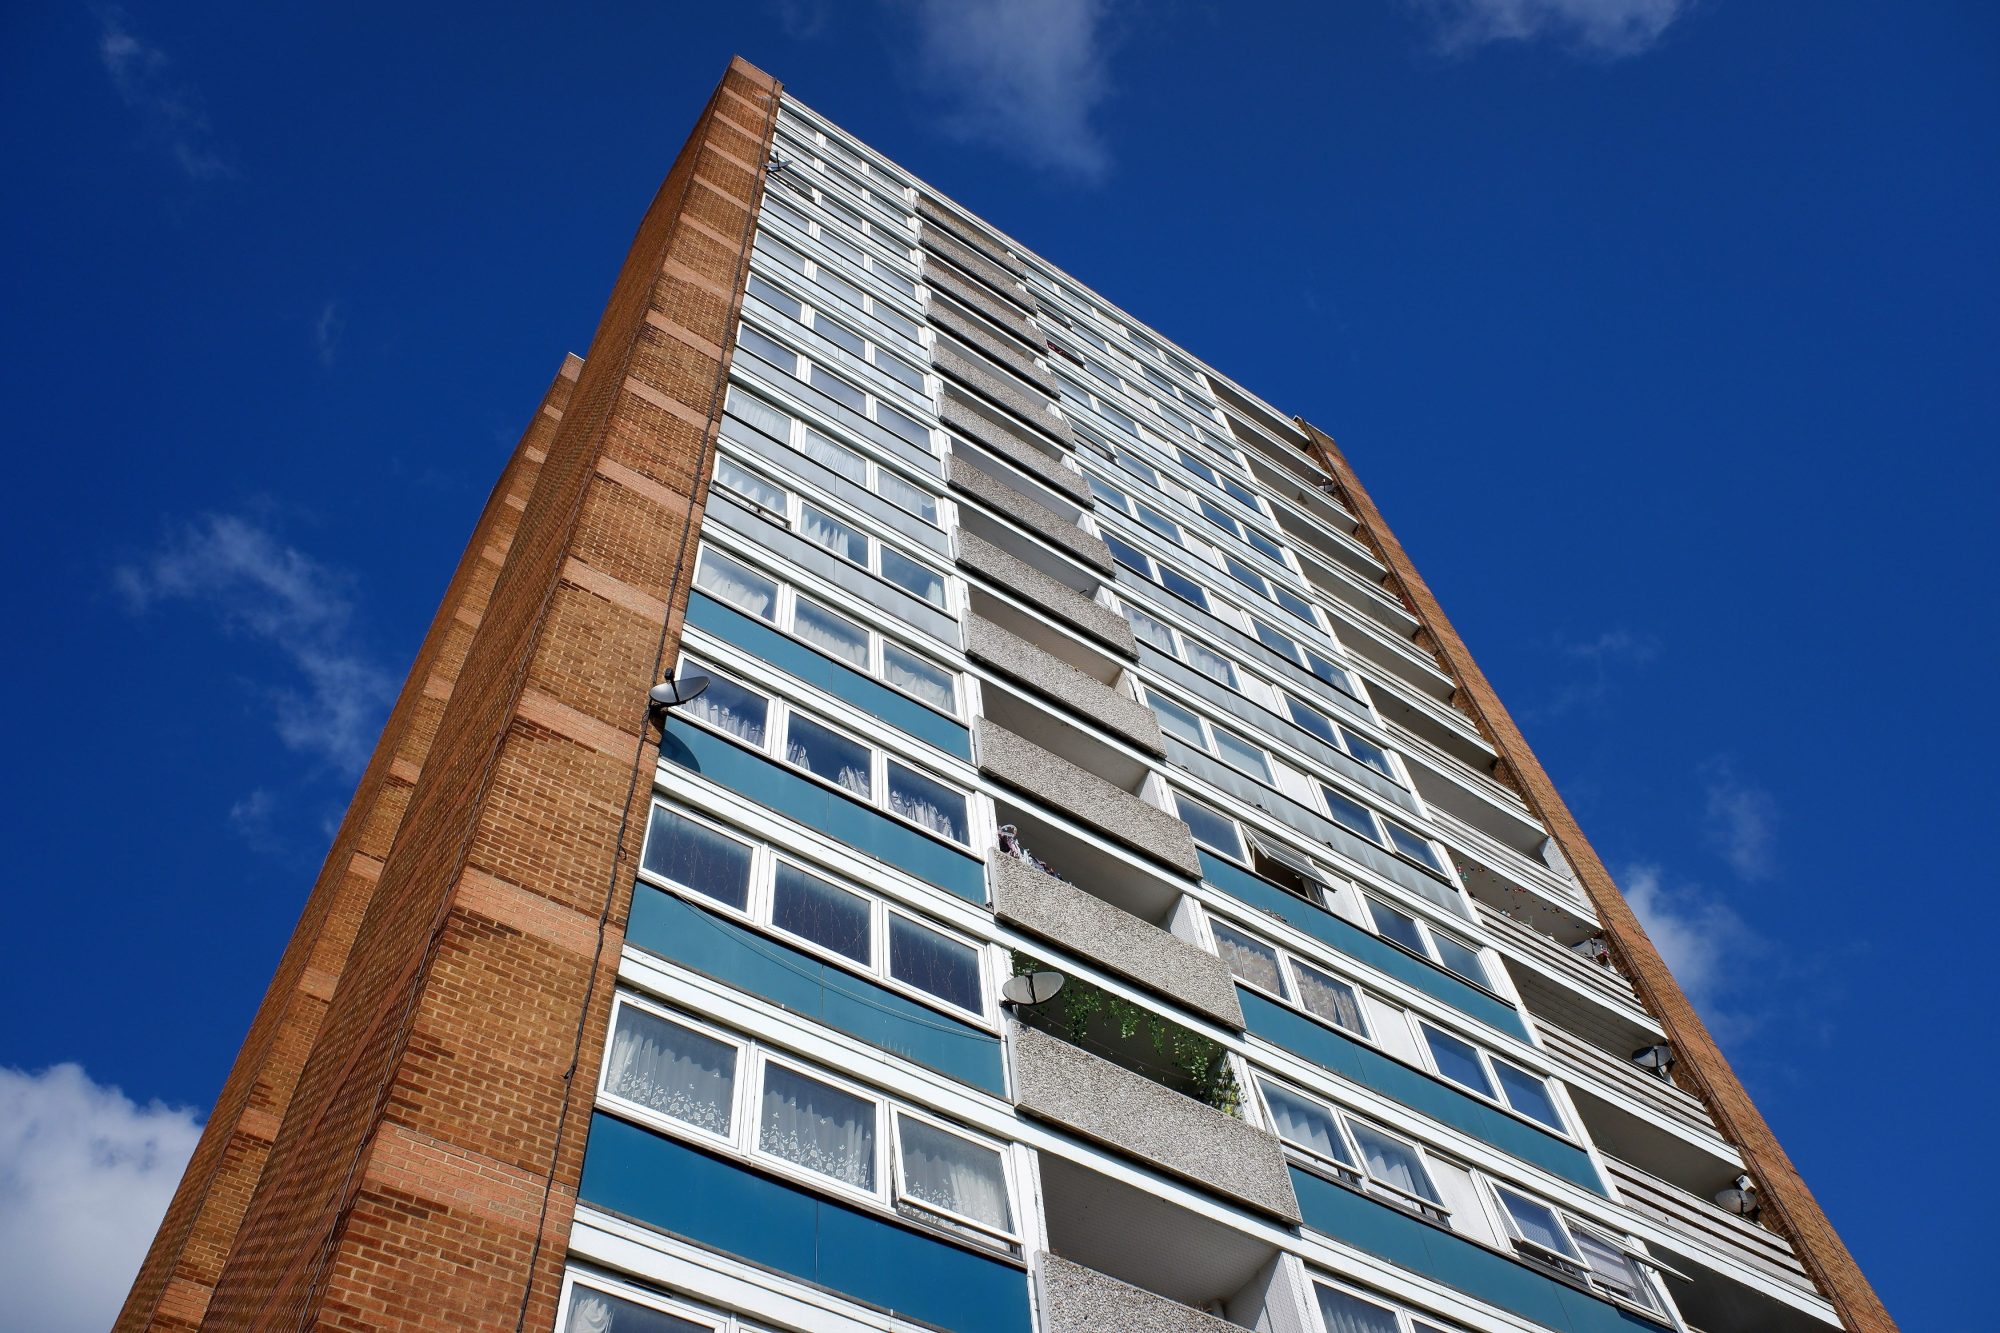 High rise social housing in need of window restrictors